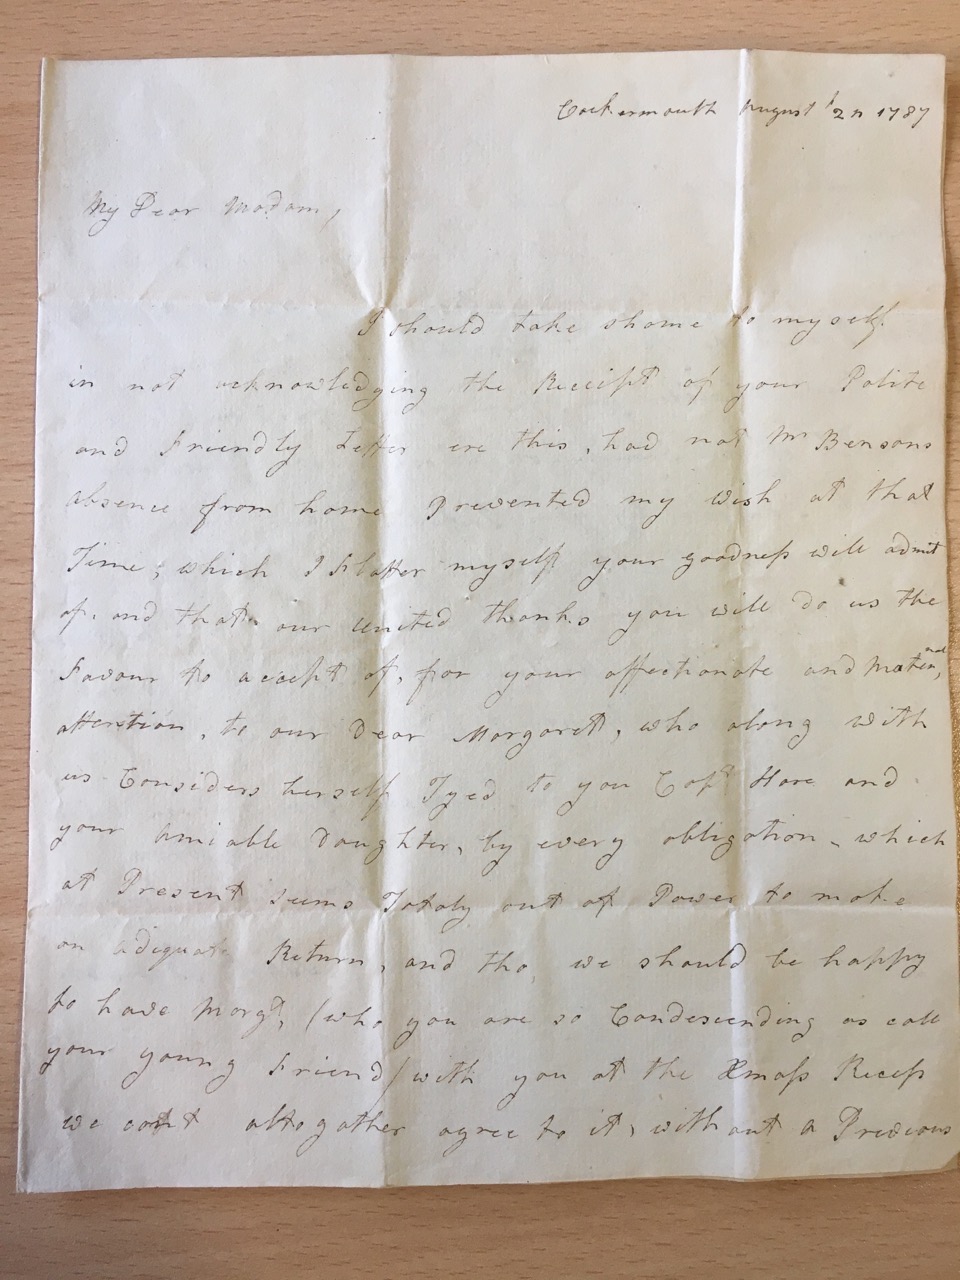 Image #2 of letter: Isabella Benson to Ann Hare, 12 August 1787